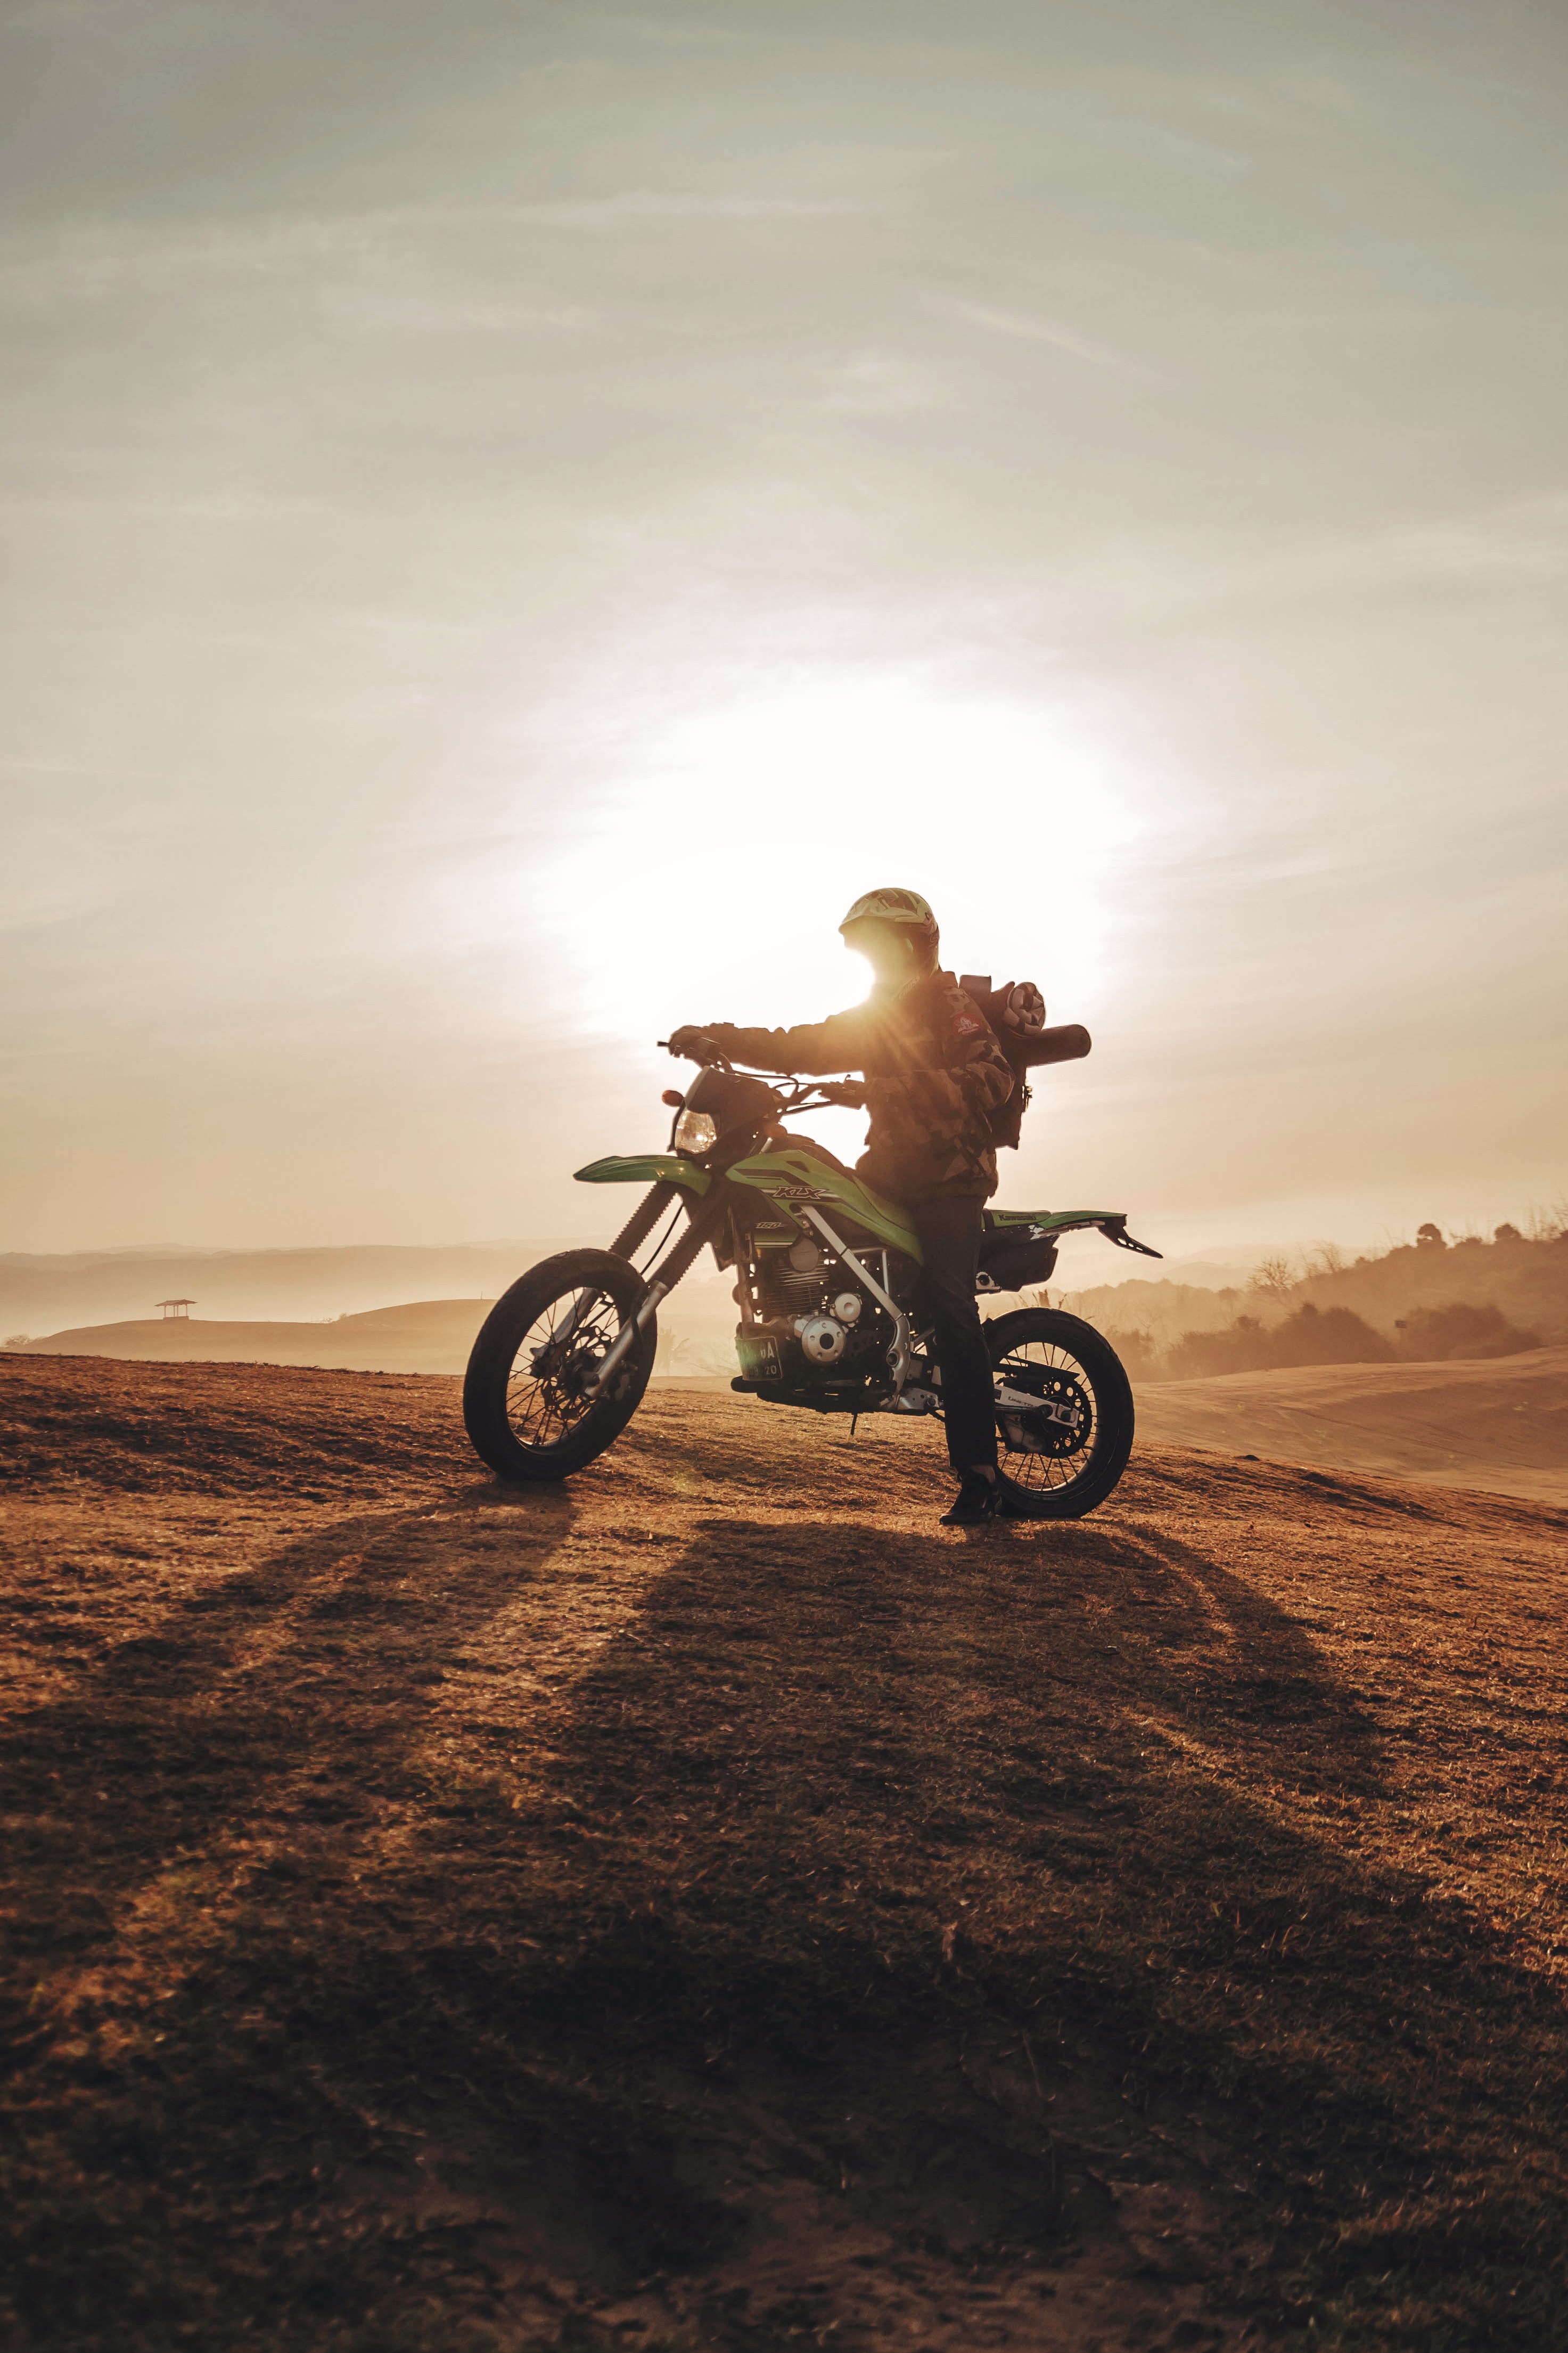 Motorcycle motorcyclist, dawn, motorcycles, indonesia 4k Wallpaper